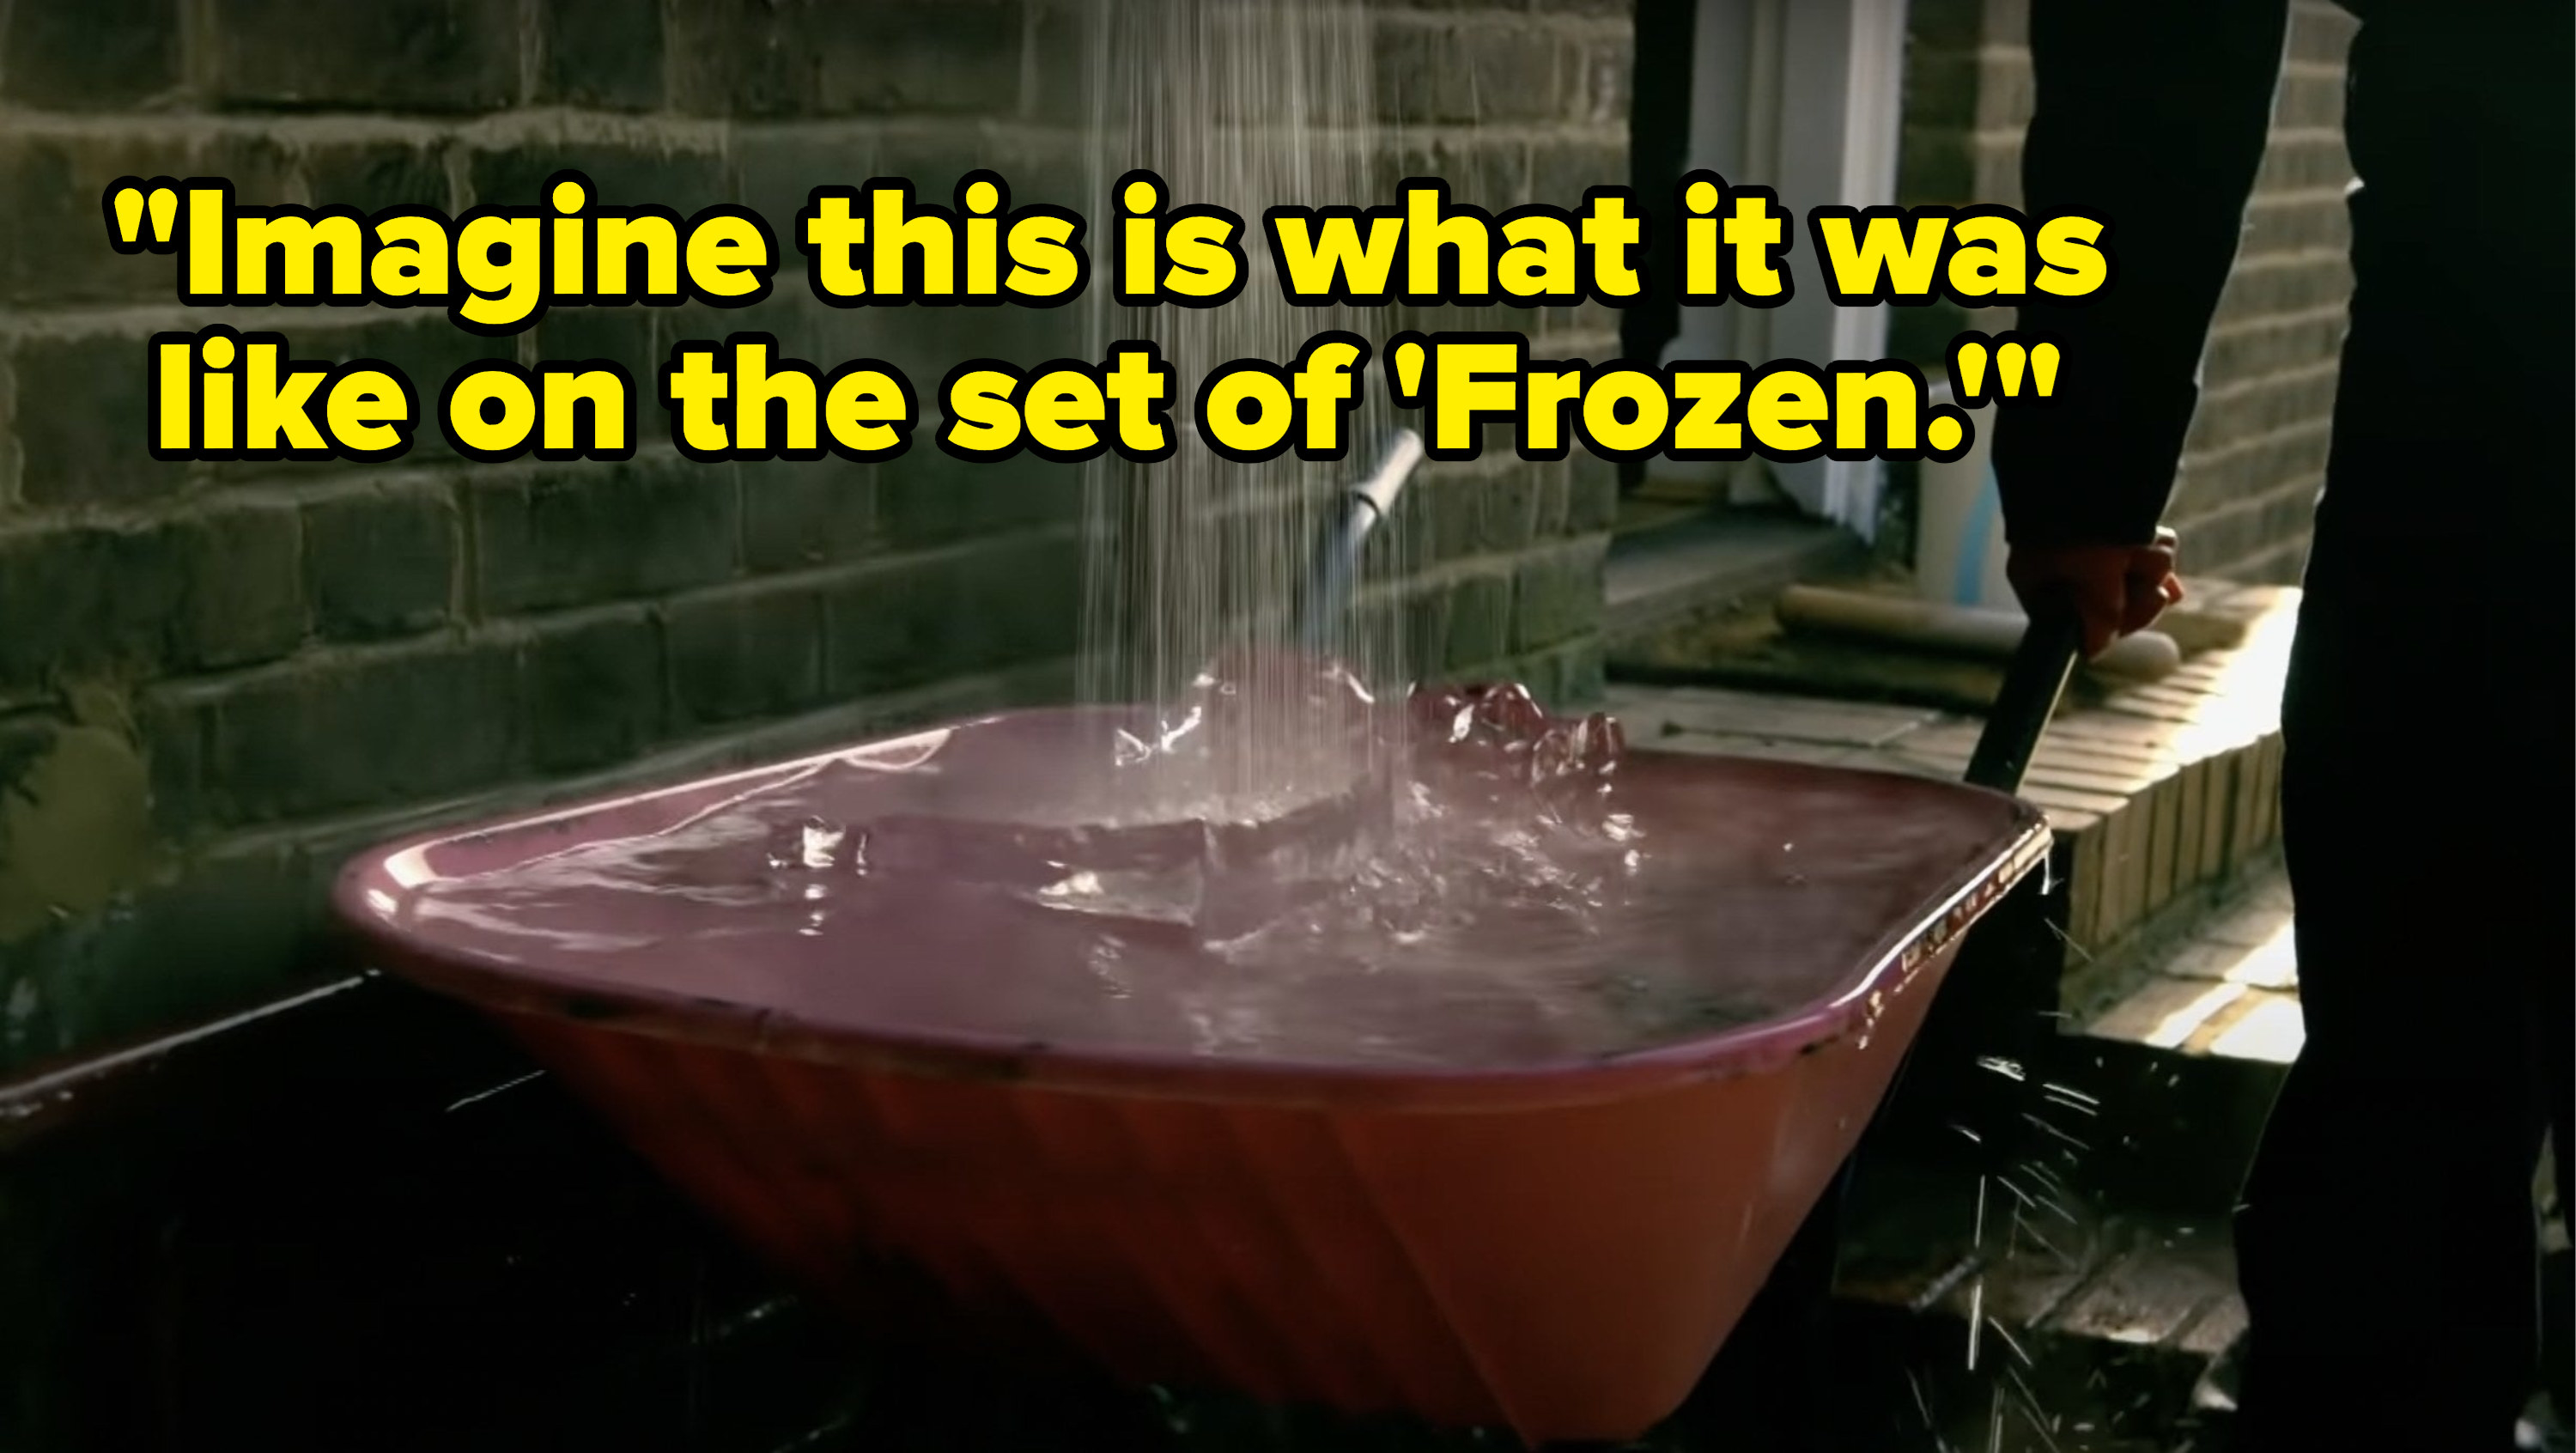 While watching a block of ice being melted by hot water, Roisin Conaty says, Imagine this is what it was like on the set of Frozen